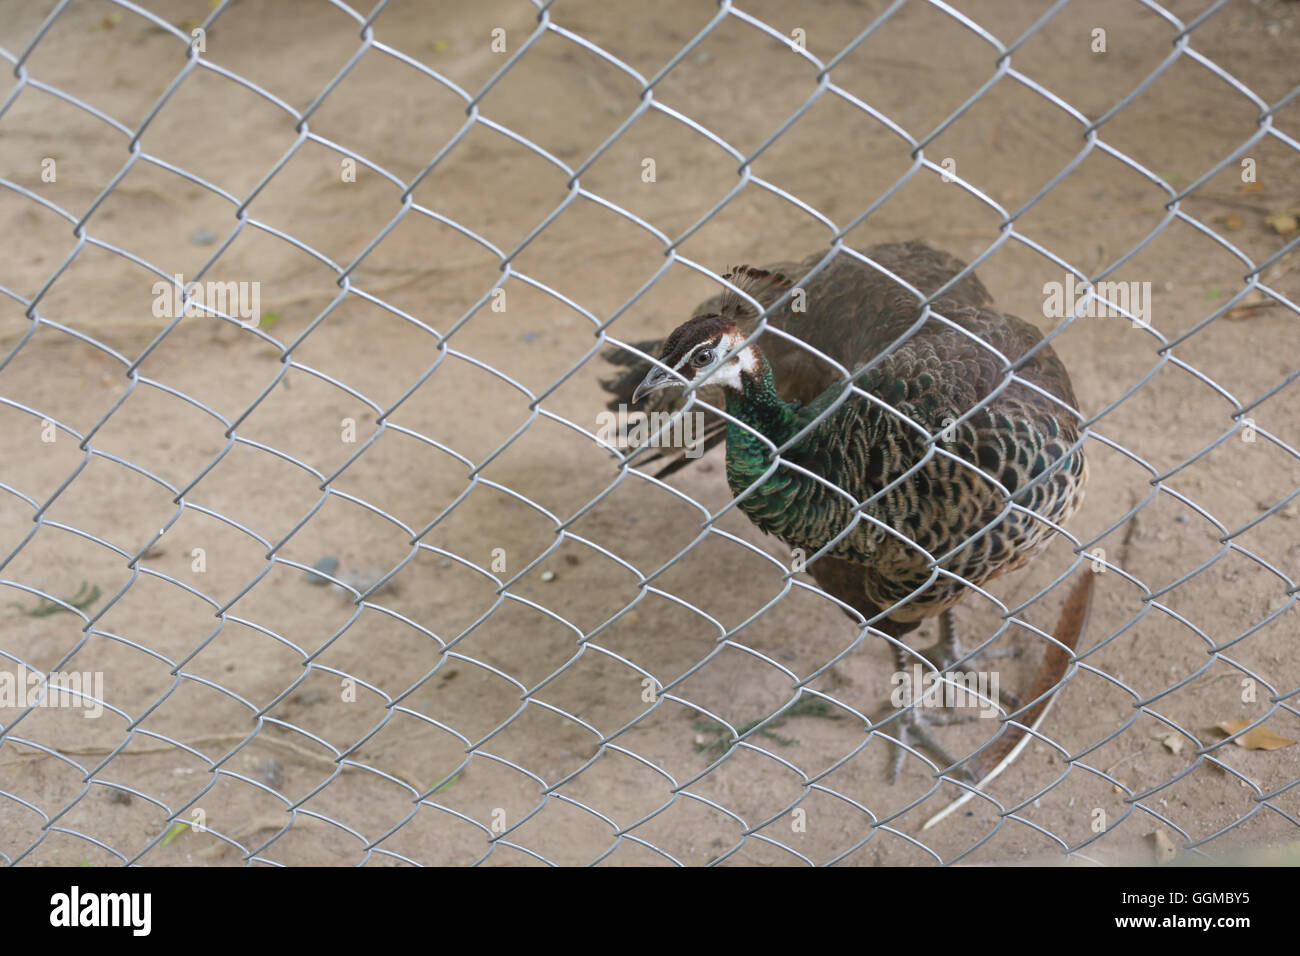 Peacock of conserve bird are trapped inside a cage concept of capturing wild animals. Stock Photo